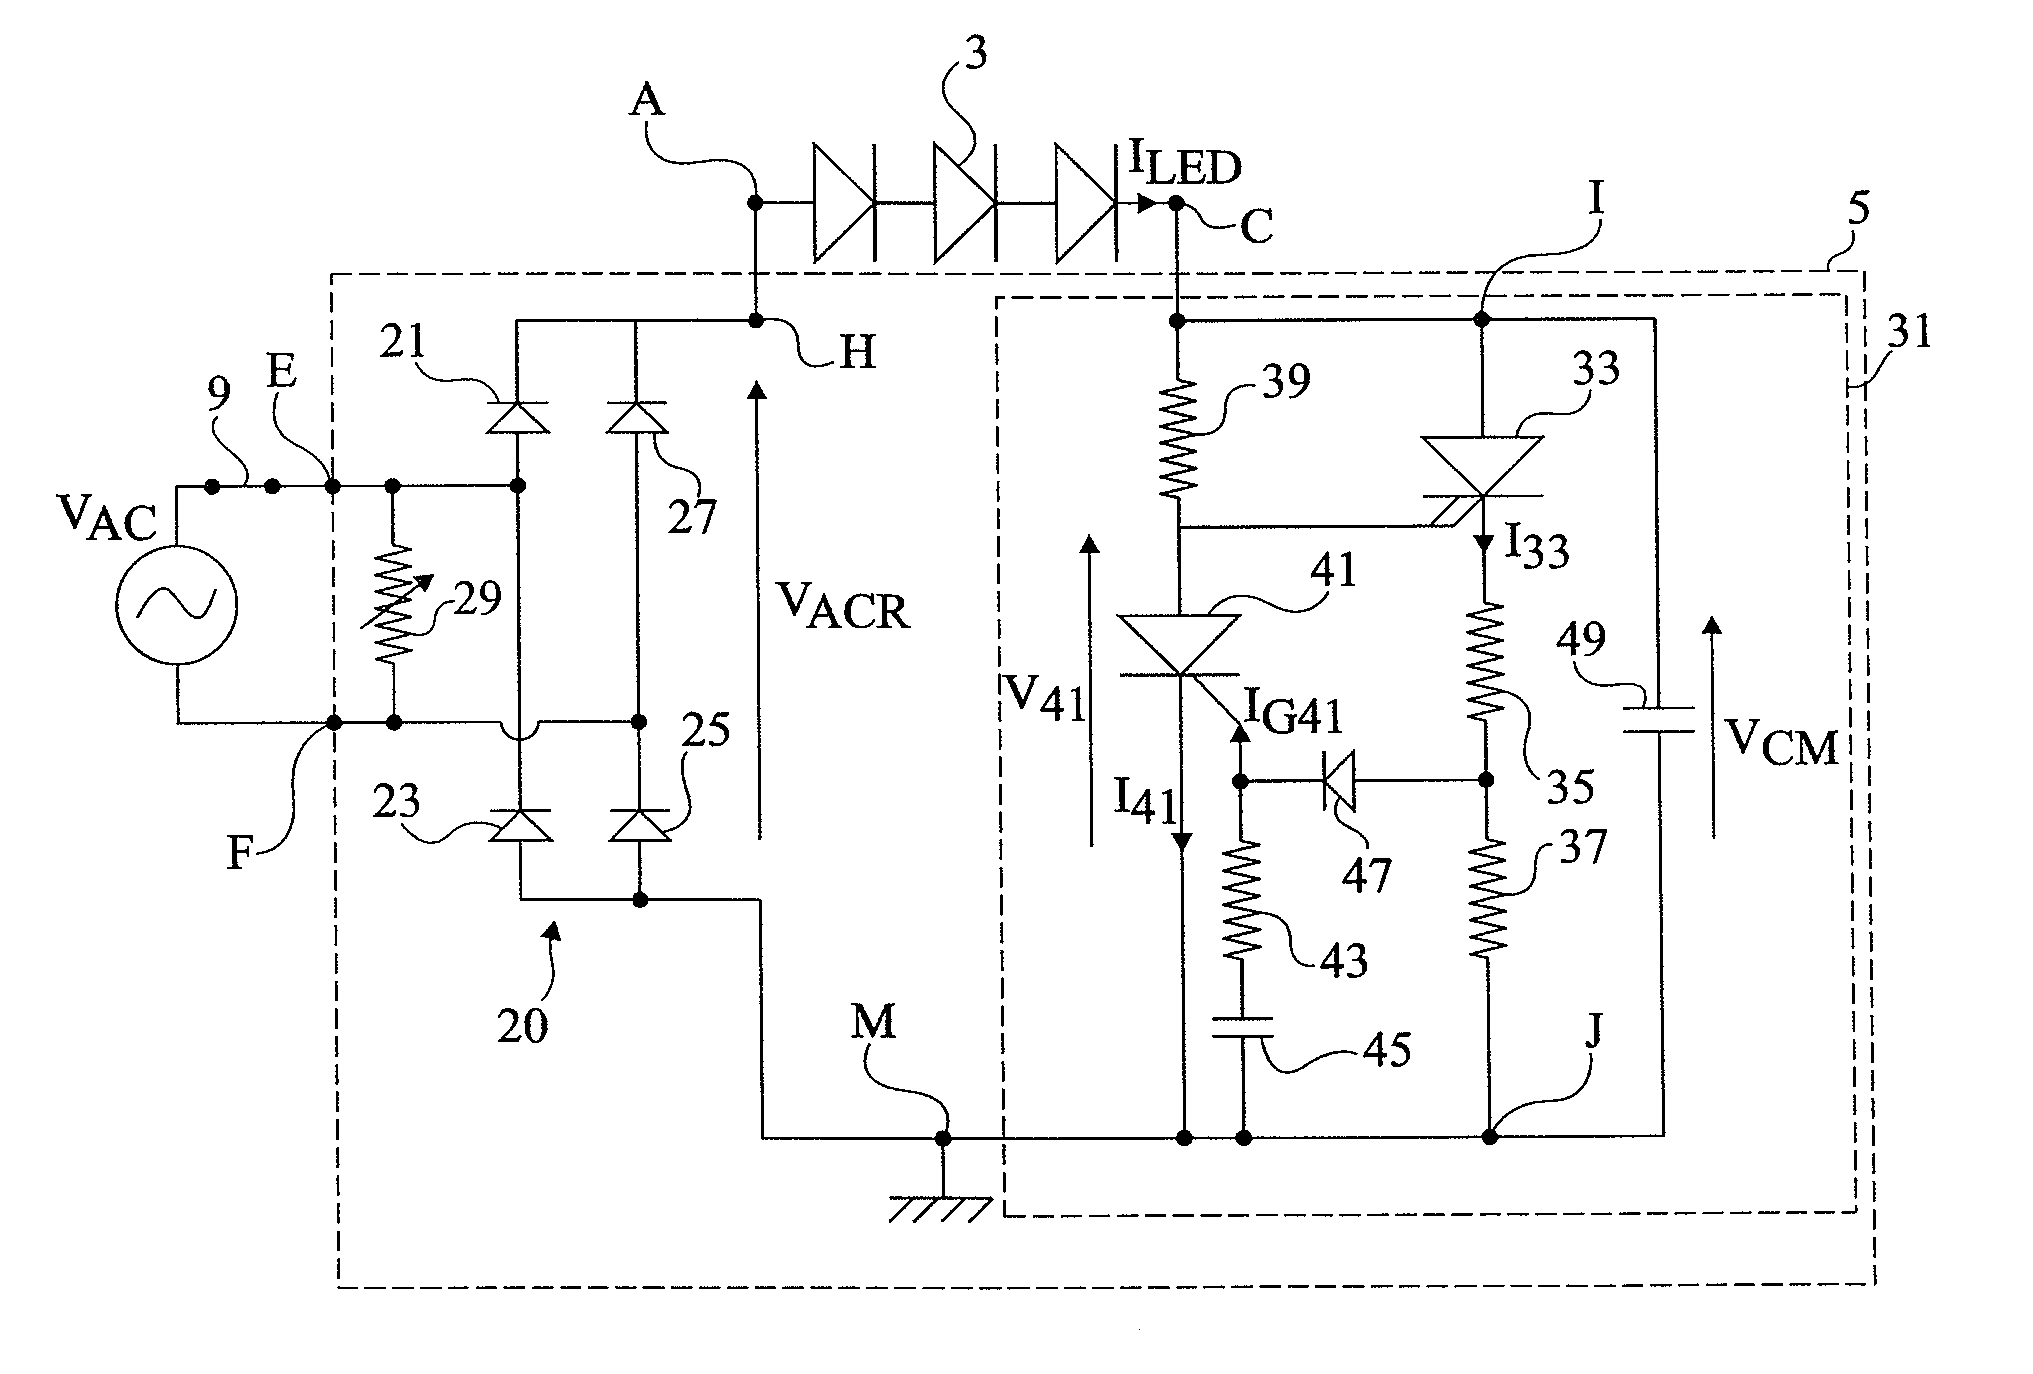 Circuit for controlling a lighting unit with light-emitting diodes